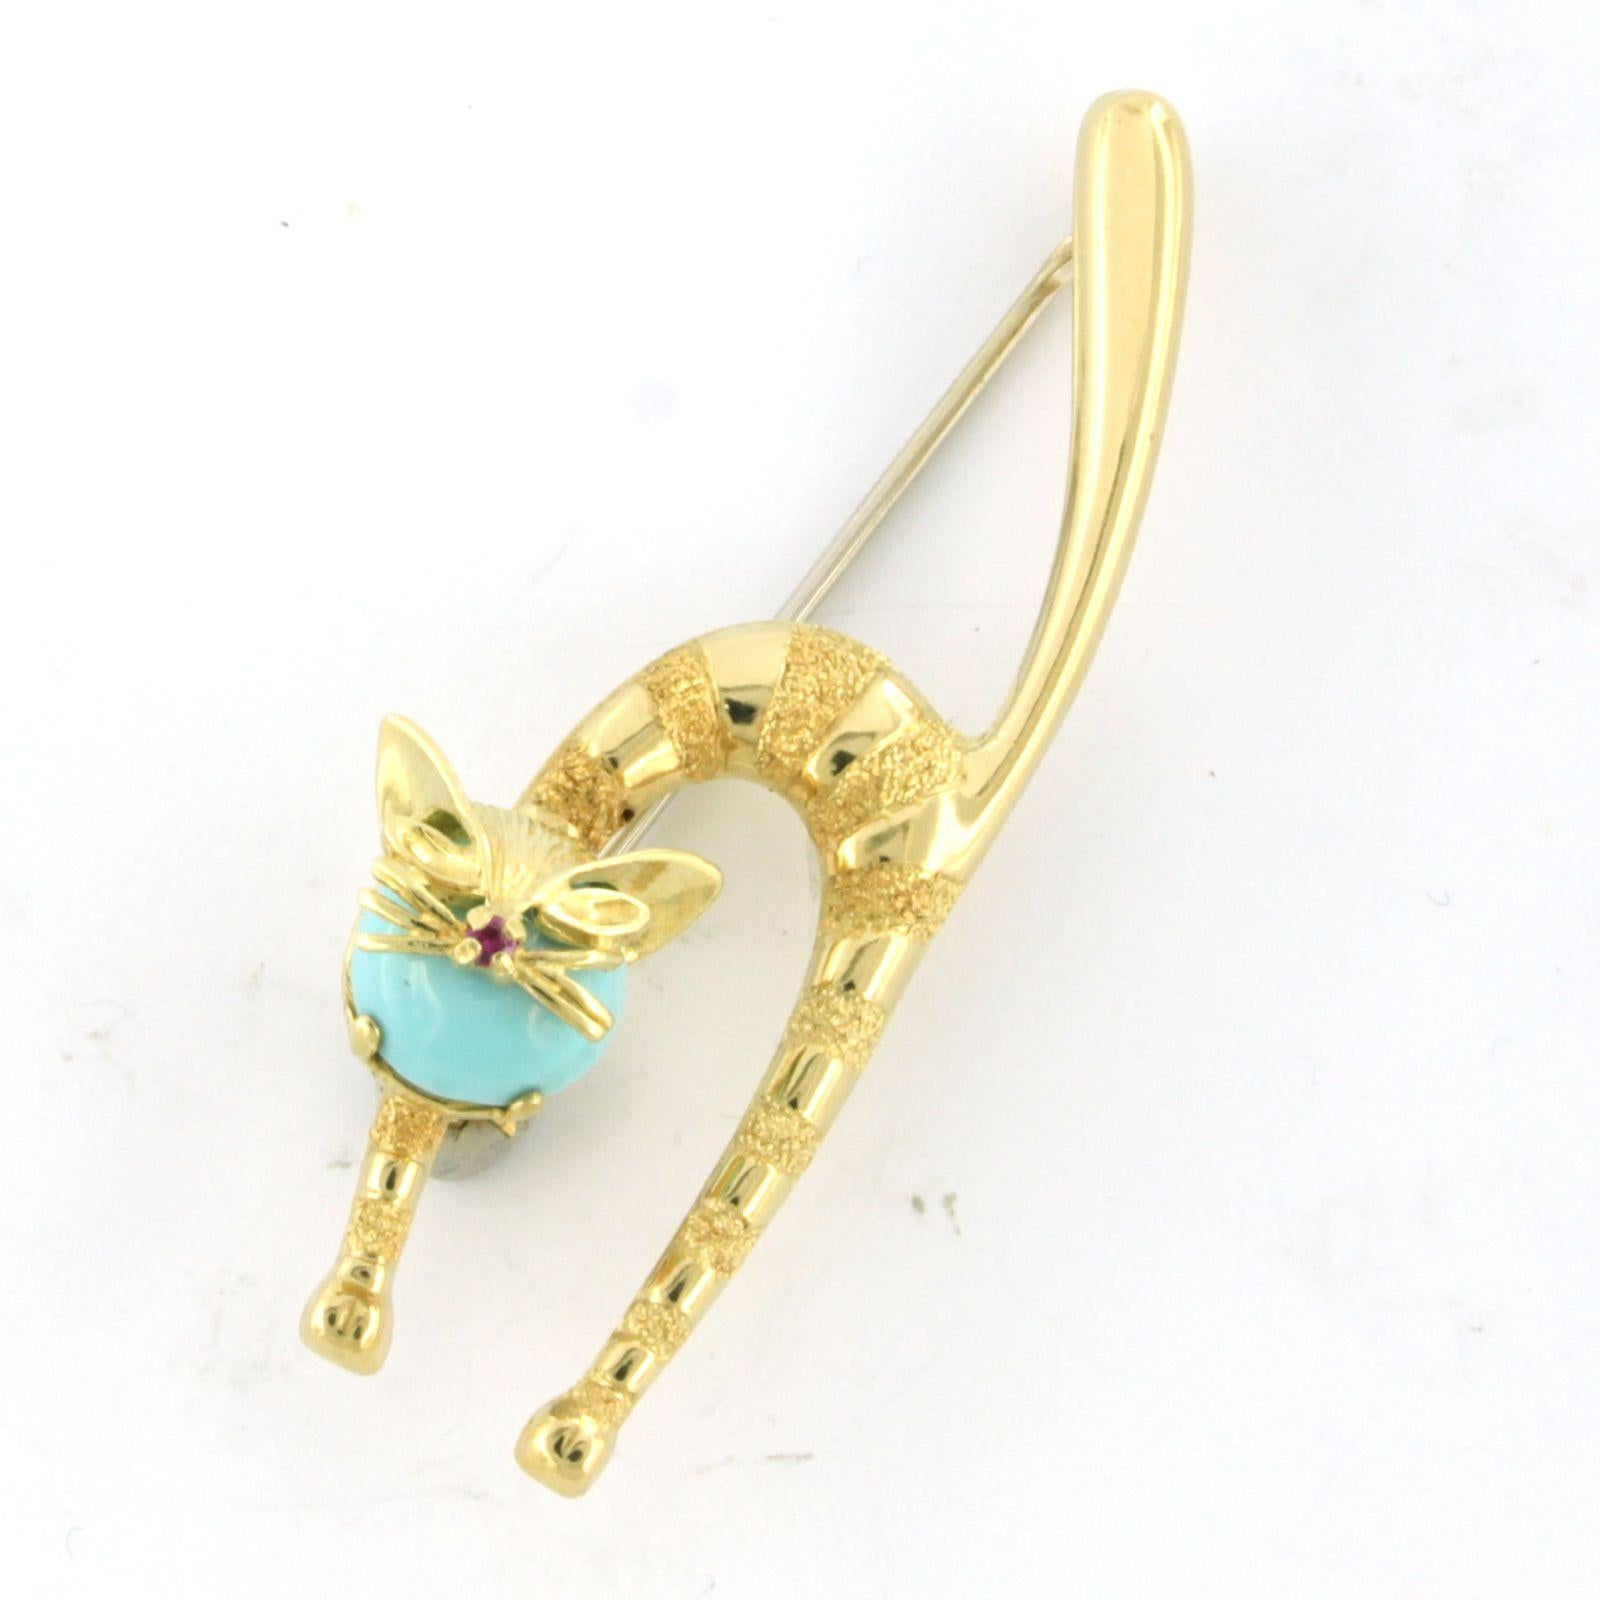 Modern Brooch with Ruby and turquoise in shape of a cat 18k yellow gold